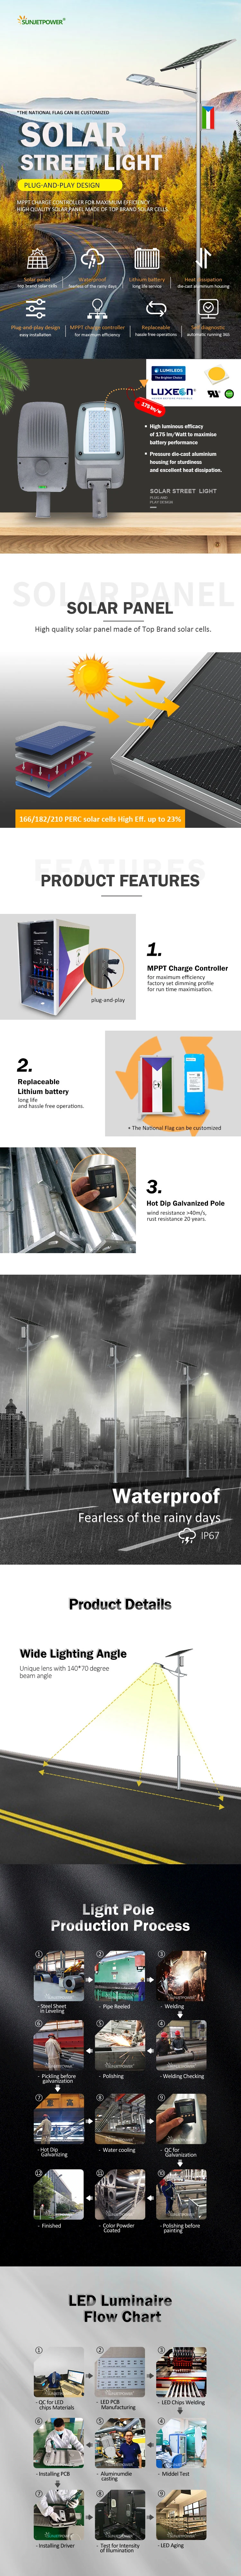 Hot DIP Galvanization 20W Dimming Plan LED Solar Street Light by 40W Mono Solar Panel with LiFePO4 Battery